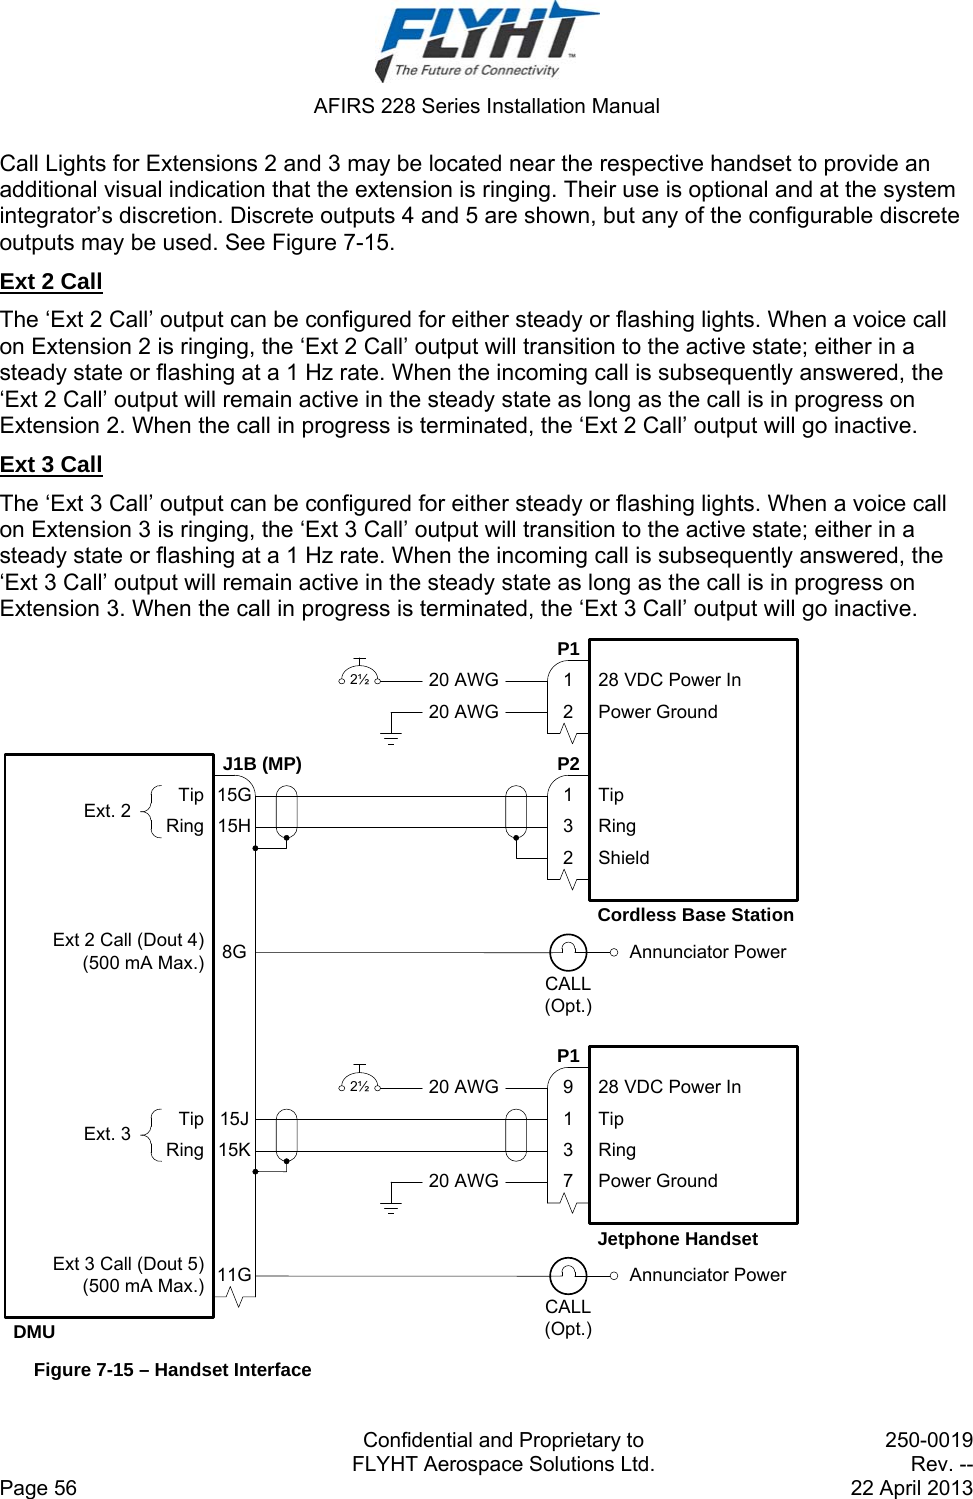  AFIRS 228 Series Installation Manual   Confidential and Proprietary to  250-0019   FLYHT Aerospace Solutions Ltd.  Rev. -- Page 56    22 April 2013 Call Lights for Extensions 2 and 3 may be located near the respective handset to provide an additional visual indication that the extension is ringing. Their use is optional and at the system integrator’s discretion. Discrete outputs 4 and 5 are shown, but any of the configurable discrete outputs may be used. See Figure 7-15. Ext 2 Call The ‘Ext 2 Call’ output can be configured for either steady or flashing lights. When a voice call on Extension 2 is ringing, the ‘Ext 2 Call’ output will transition to the active state; either in a steady state or flashing at a 1 Hz rate. When the incoming call is subsequently answered, the ‘Ext 2 Call’ output will remain active in the steady state as long as the call is in progress on Extension 2. When the call in progress is terminated, the ‘Ext 2 Call’ output will go inactive. Ext 3 Call The ‘Ext 3 Call’ output can be configured for either steady or flashing lights. When a voice call on Extension 3 is ringing, the ‘Ext 3 Call’ output will transition to the active state; either in a steady state or flashing at a 1 Hz rate. When the incoming call is subsequently answered, the ‘Ext 3 Call’ output will remain active in the steady state as long as the call is in progress on Extension 3. When the call in progress is terminated, the ‘Ext 3 Call’ output will go inactive. Cordless Base StationTipRingDMU15GJ1B (MP)15HTipRingExt. 215J15KTipRingExt. 3123Jetphone Handset28 VDC Power InTipRing197328 VDC Power InPower Ground21P2P1ShieldPower Ground2½ 20 AWG20 AWG2½ 20 AWG20 AWGCALL(Opt.)8GExt 2 Call (Dout 4)(500 mA Max.)11GExt 3 Call (Dout 5)(500 mA Max.)CALL(Opt.)Annunciator PowerAnnunciator PowerP1 Figure 7-15 – Handset Interface 